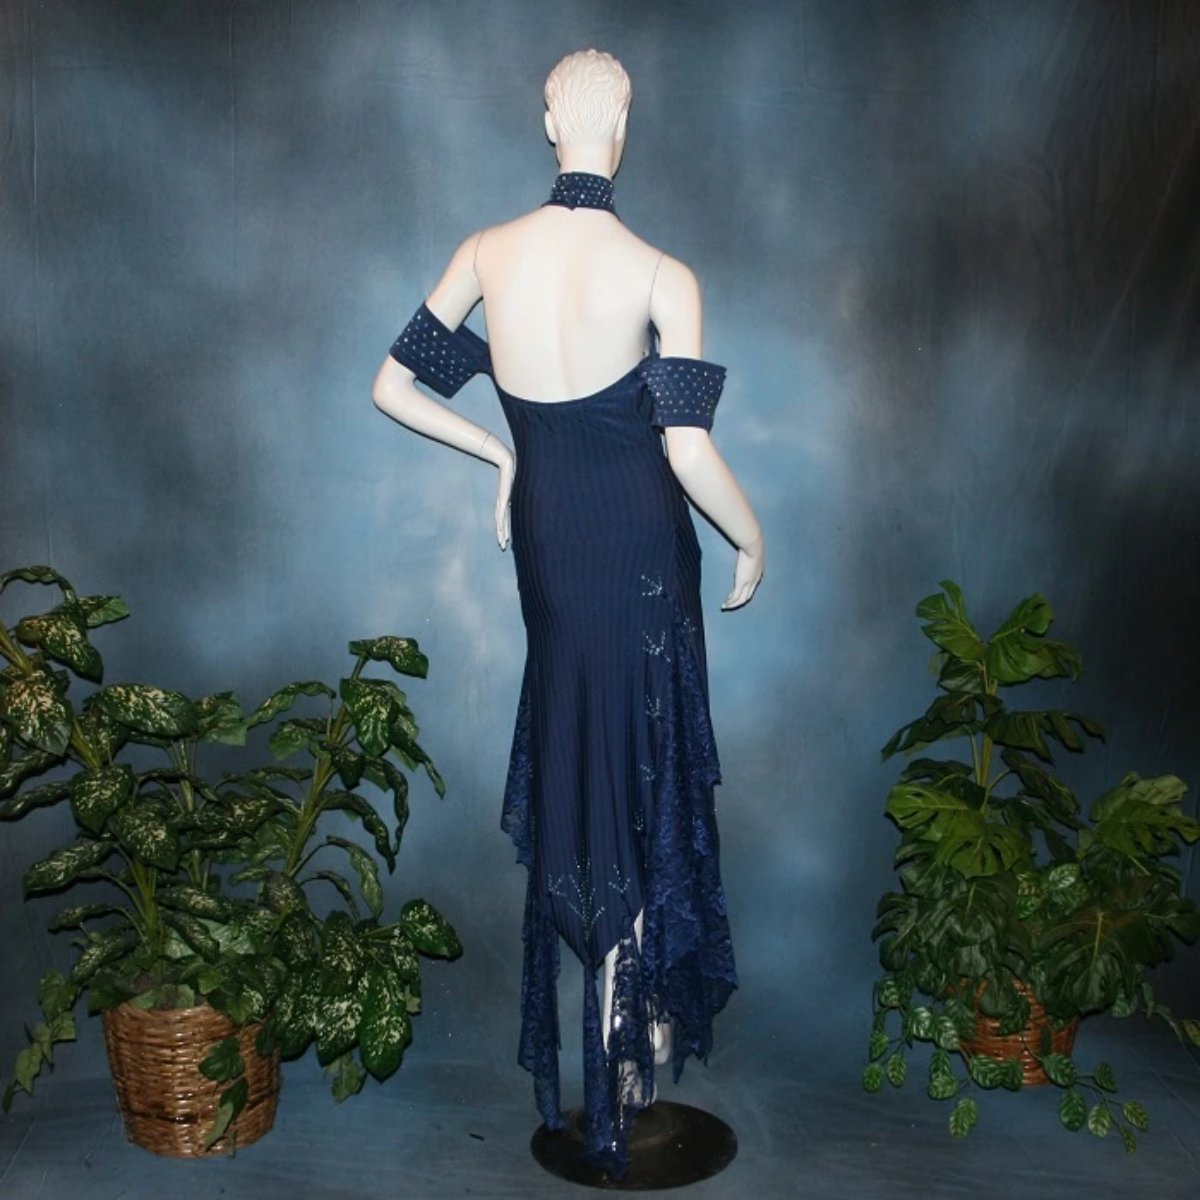 back view of Navy blue tango dress or Latin/rhythm dress created in rib textured lycra, with flounces of barcelona lace, adorned with light sapphire Swarovski rhinestones & larger navy lucite gems.